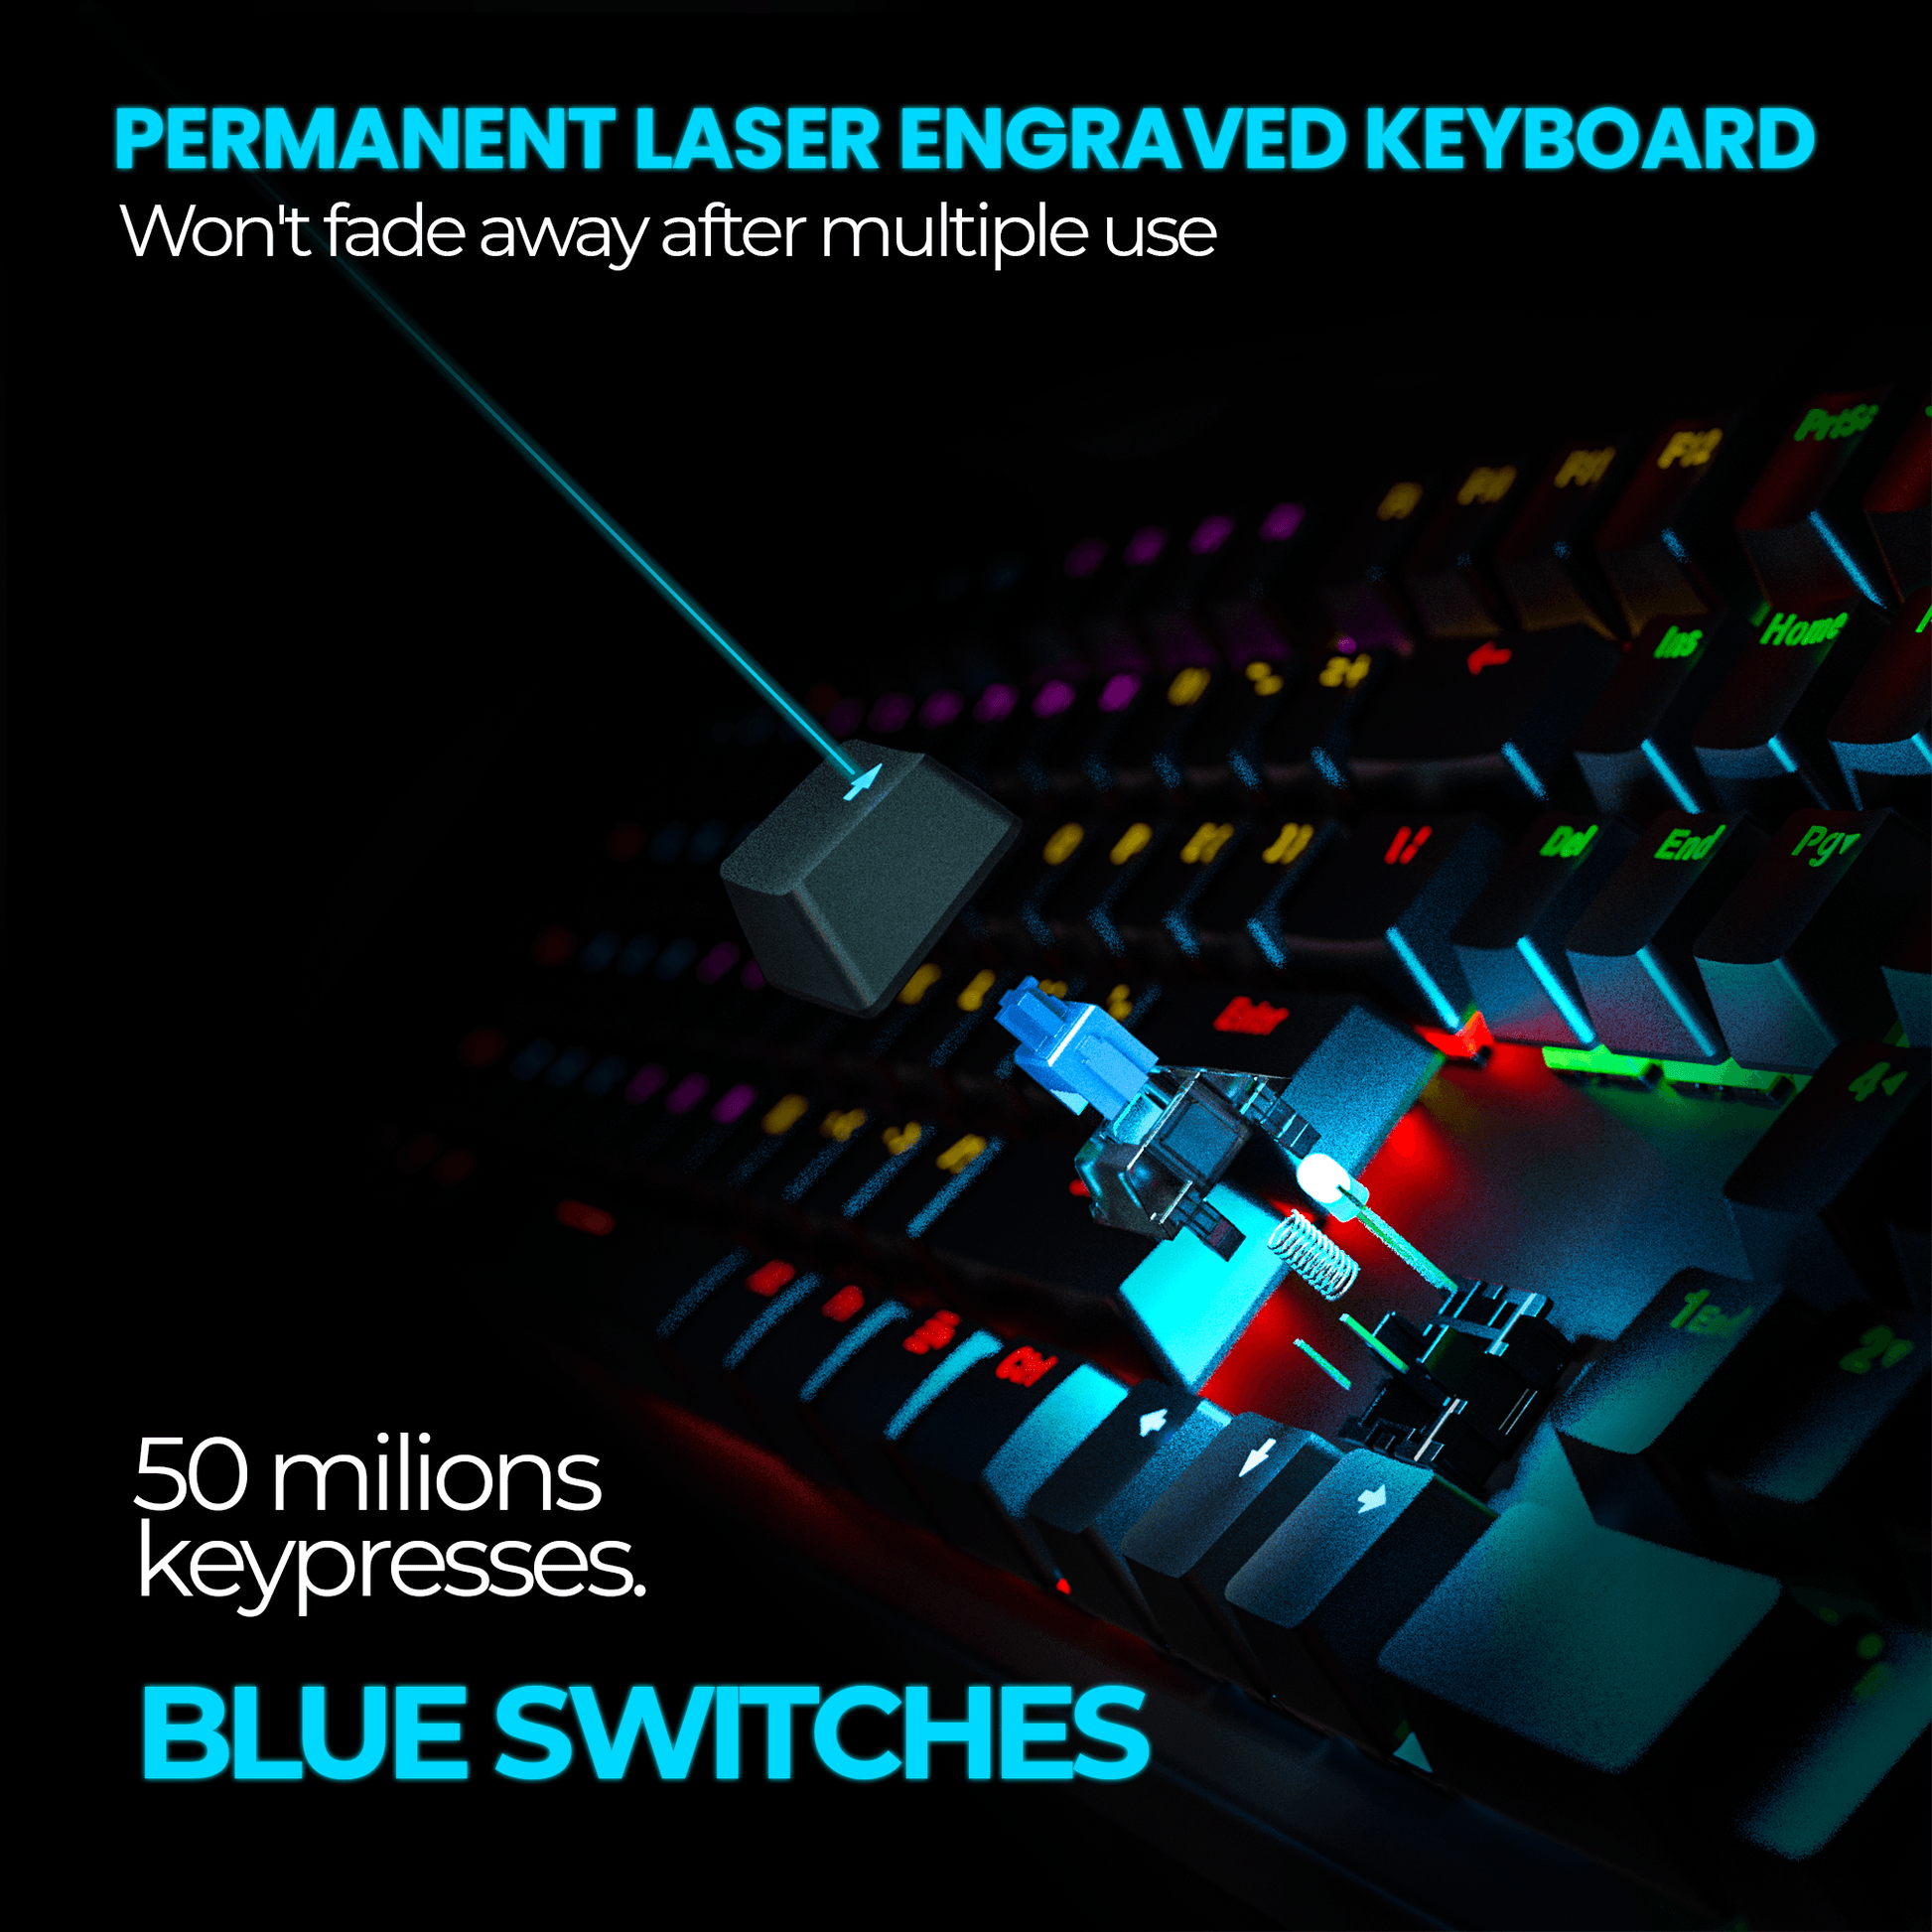 MECHANOID X107: Real Mechanical Gaming Keyboard, 107 Clicky Optical Switches, RGB Backlit - Lazy Pro